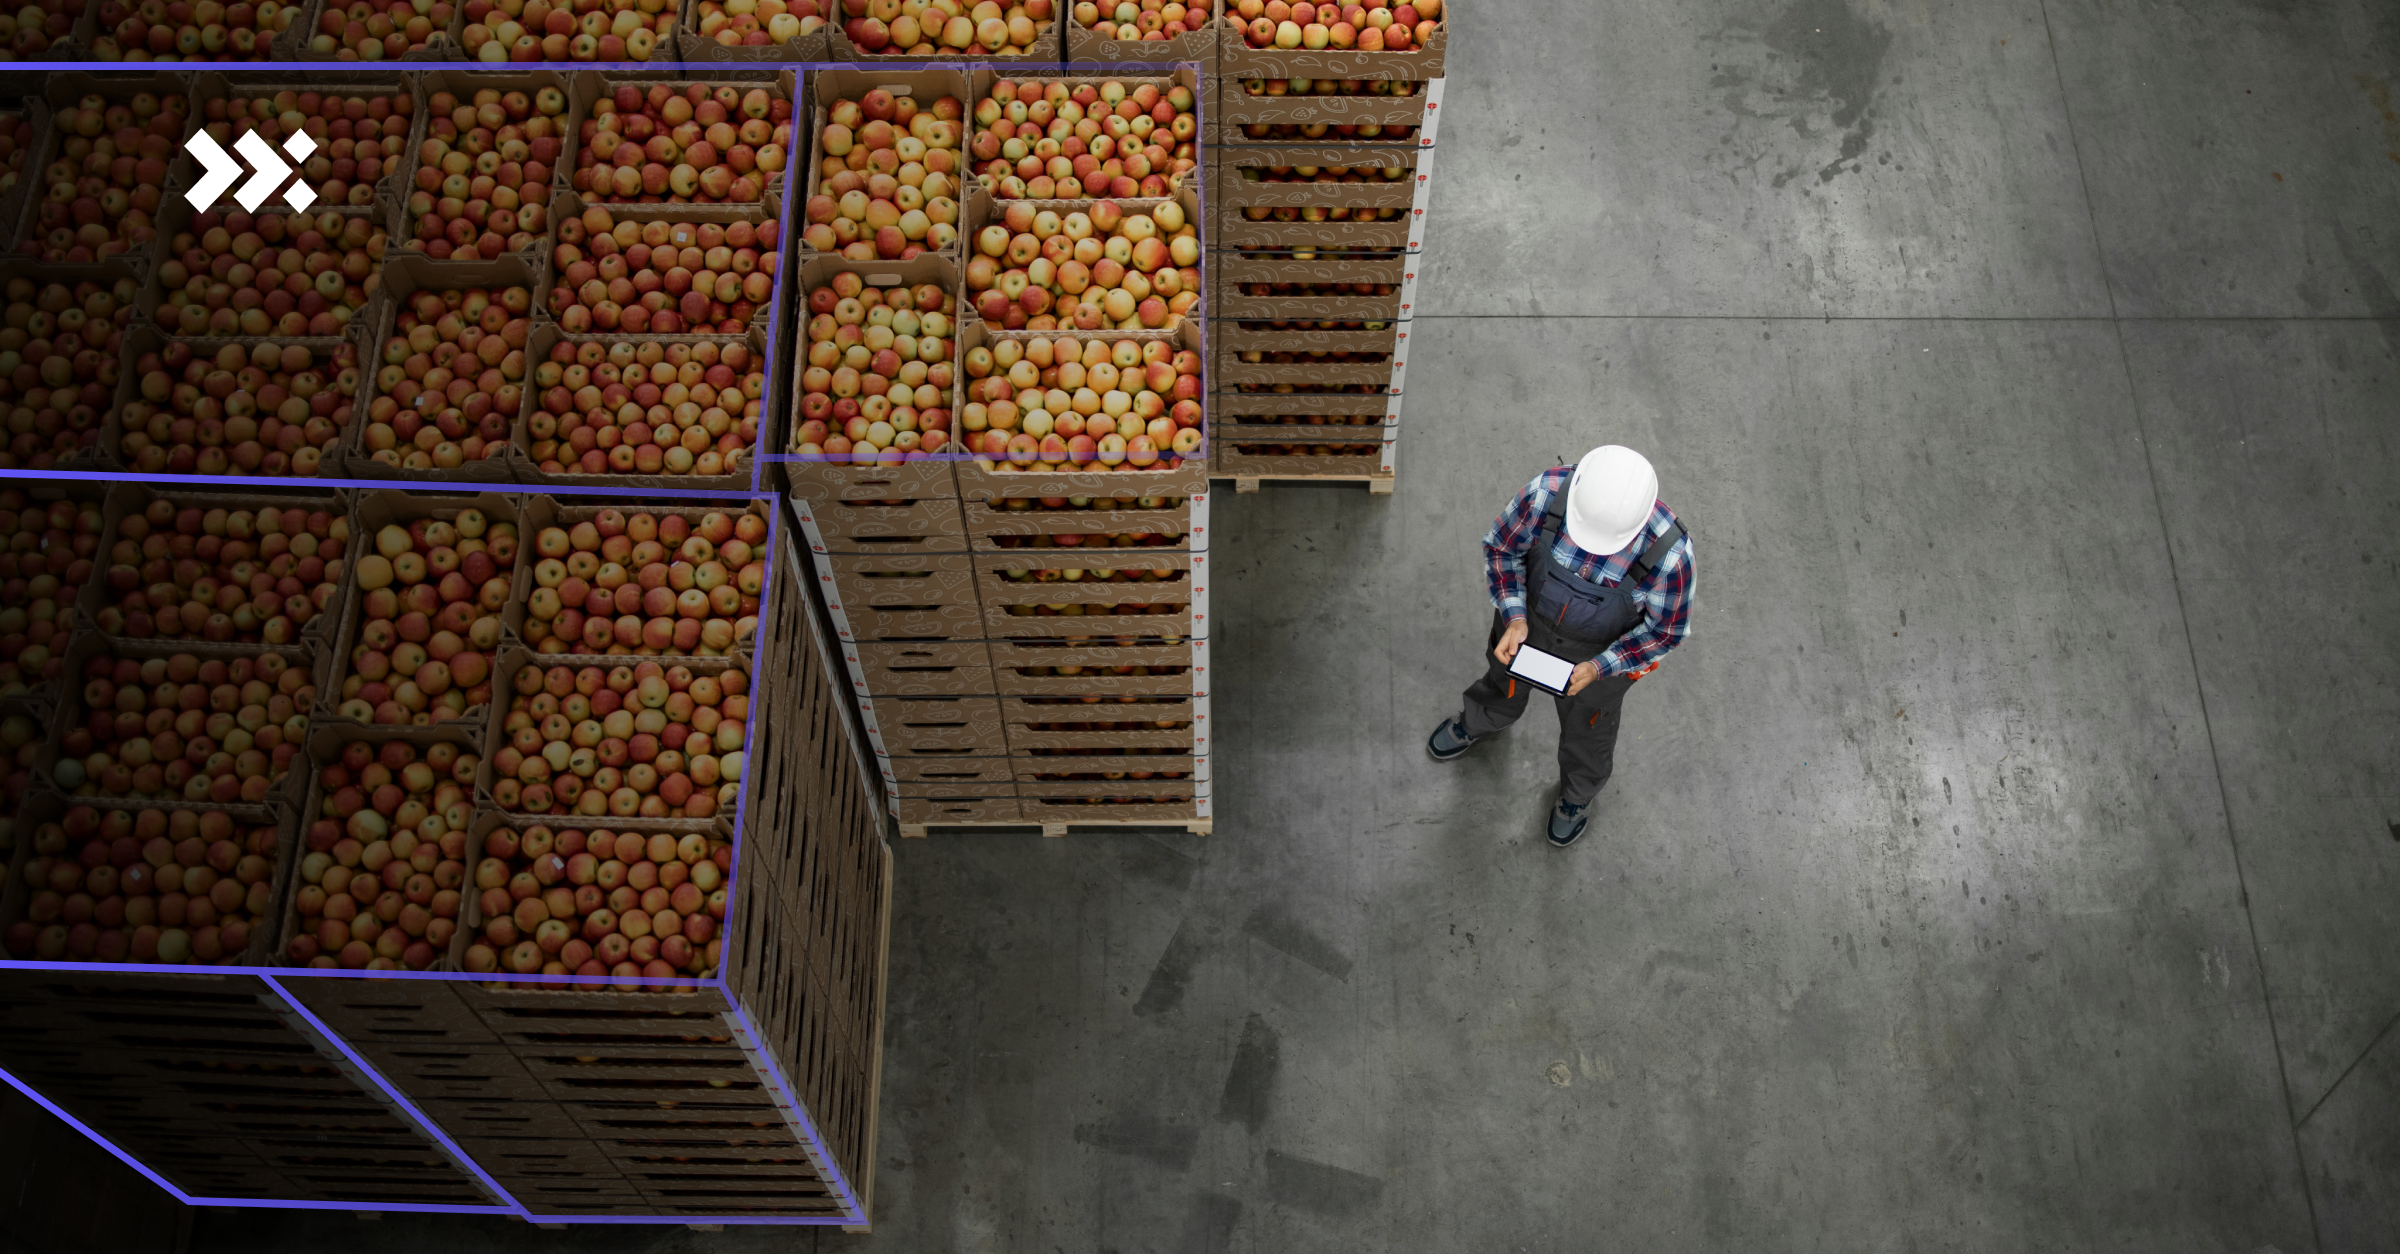 A logistics worker stands next to the boxes filled with fruits